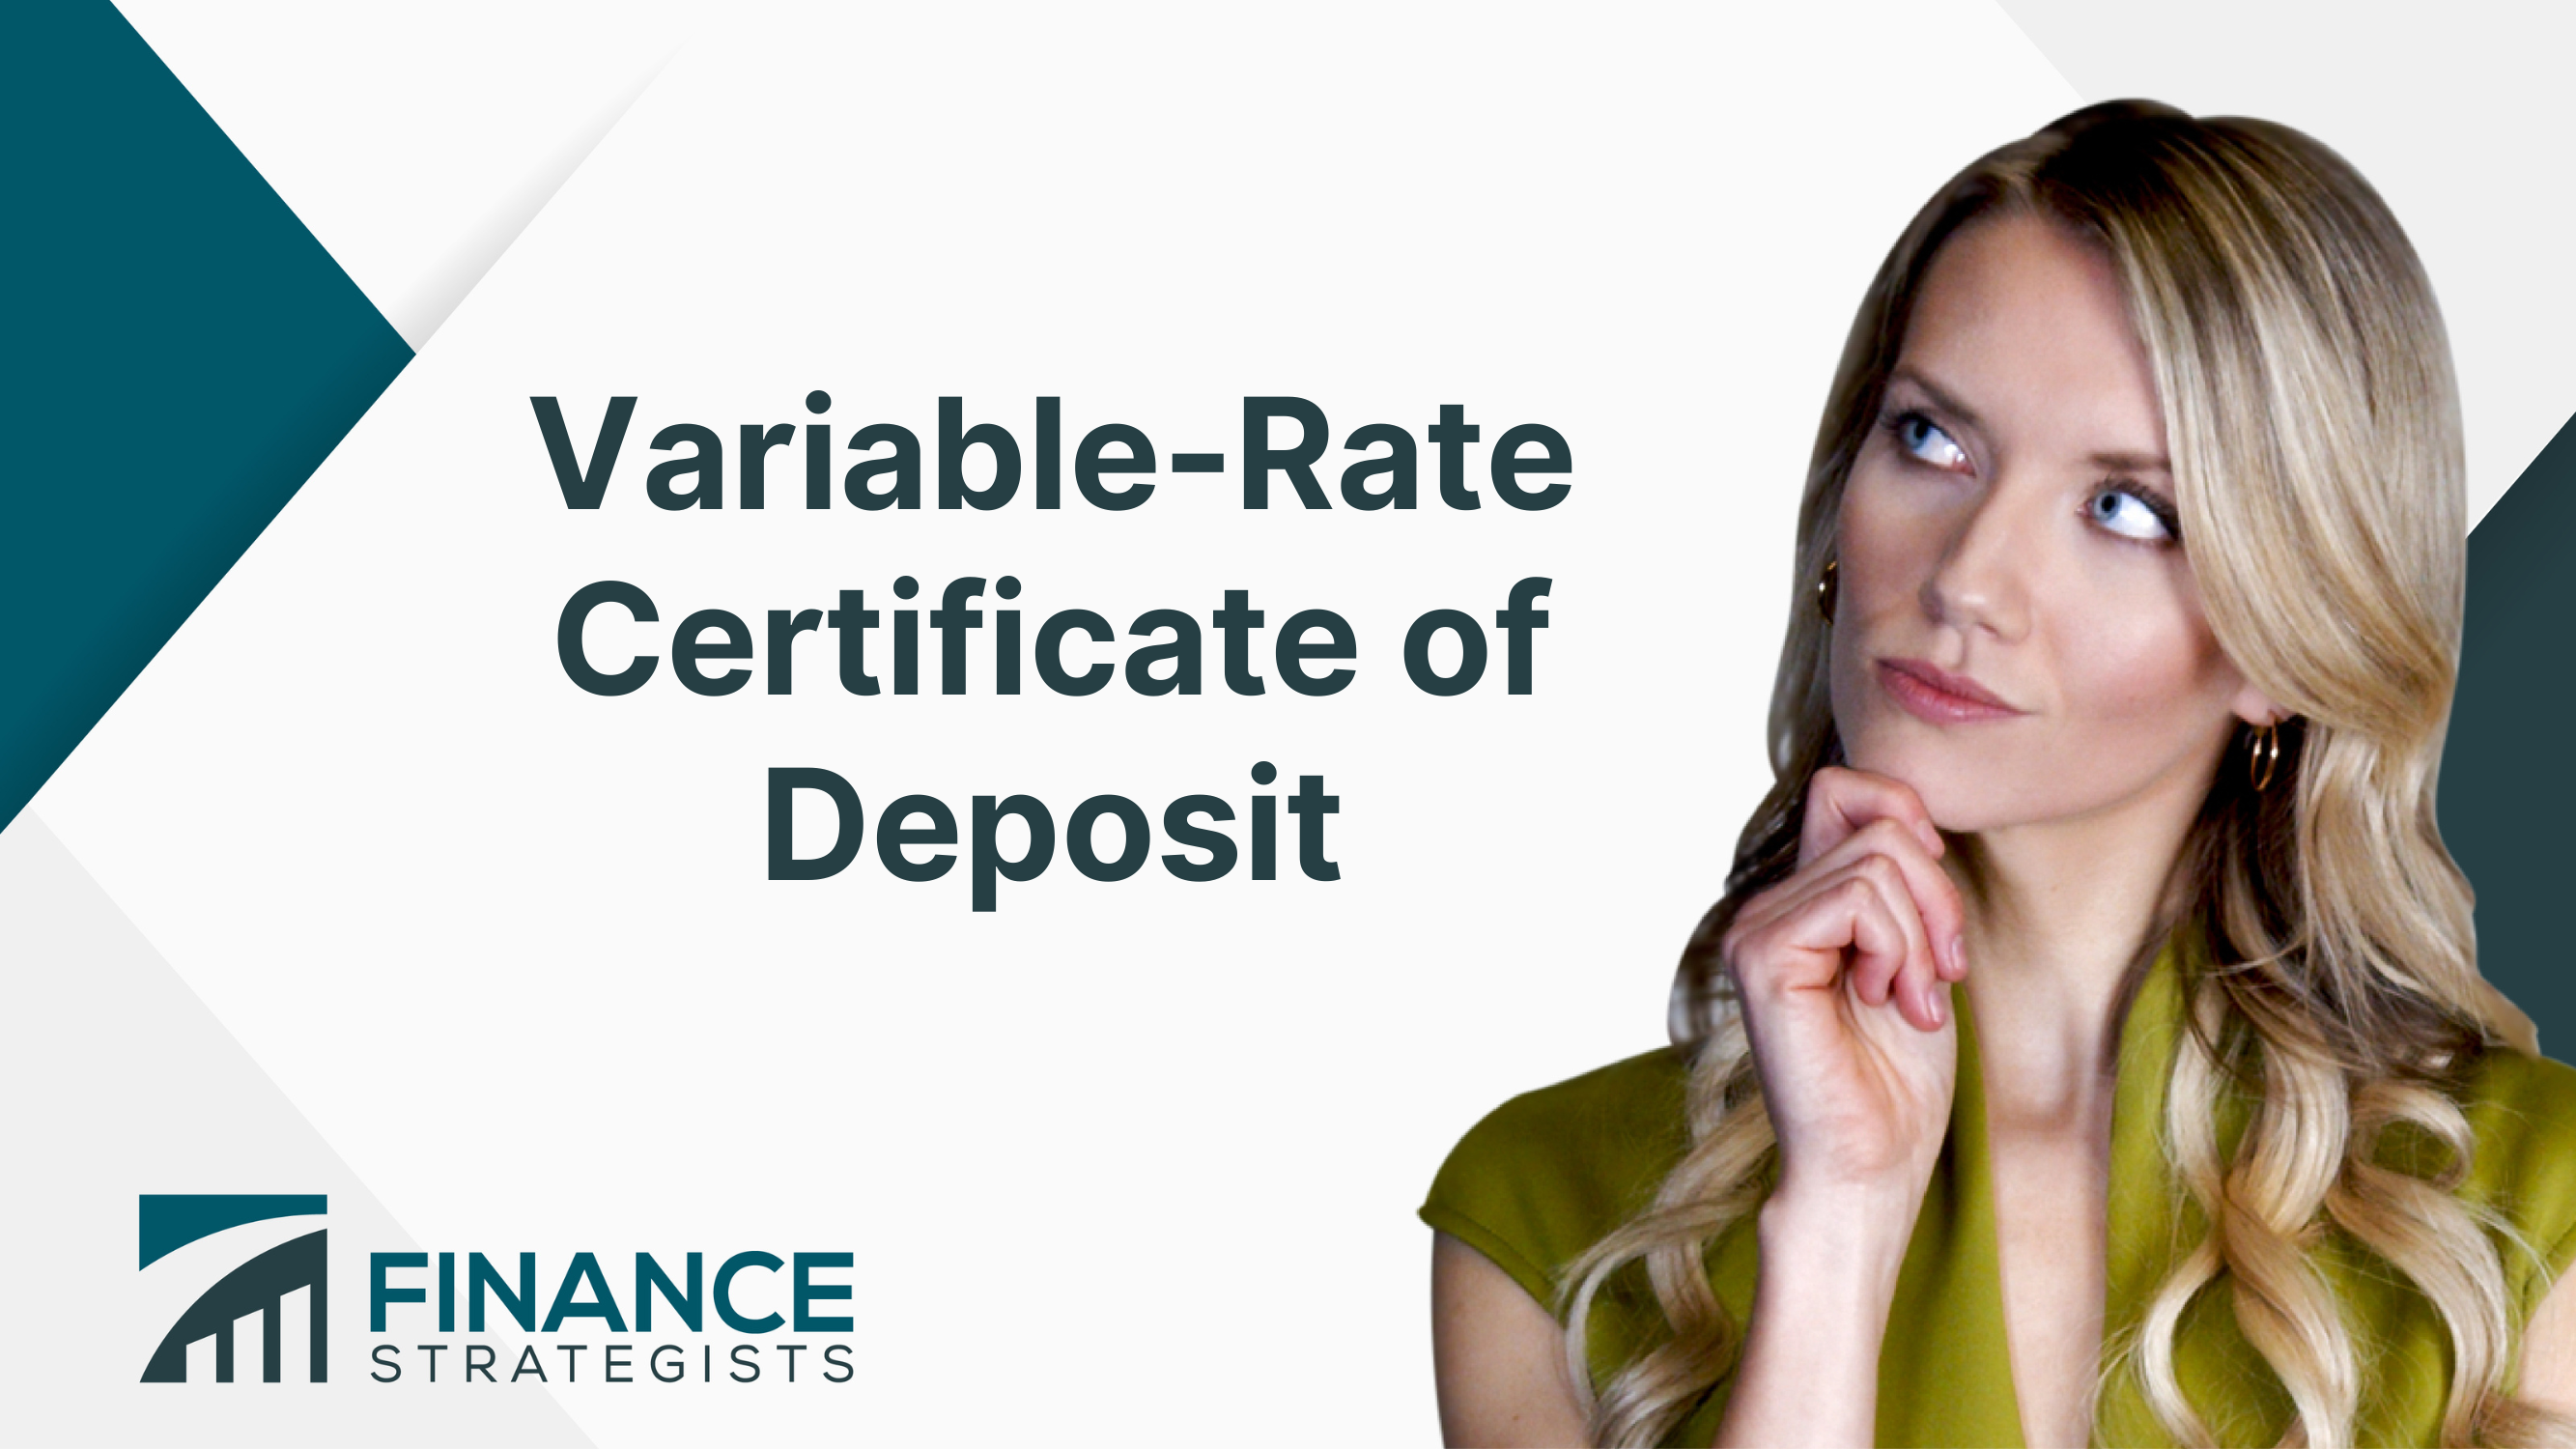 Variable Rate Certificate of Deposit Definition How It Works